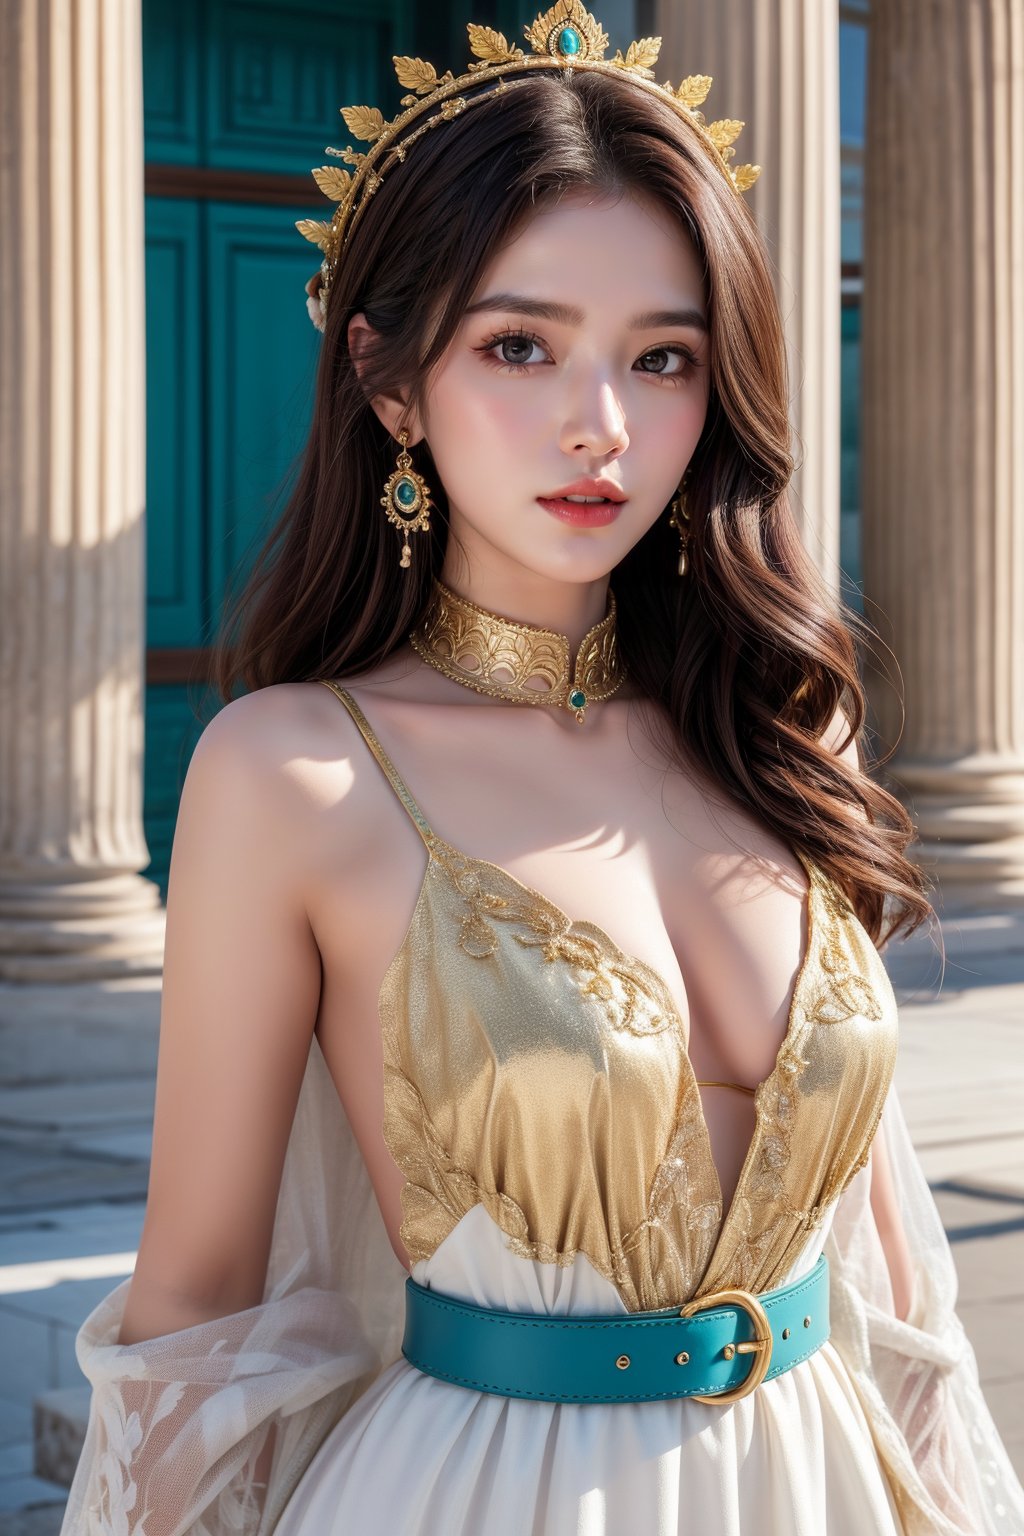 This image shows a girl dressed in a Greek style. The art style is realism. The composition is a full-length portrait, with the woman facing forward. She wears a long white dress with gold and turquoise details including a gold collar, cleavage, medium breasts, a belt and a headdress decorated with beads. The main character has long brown hair and a serious expression. The background is pure white, highlighting the details of the garment. Her accessories and makeup alluded to ancient Greek fashion, combining historical references with modern touches. Background ancient city ruins in Greece